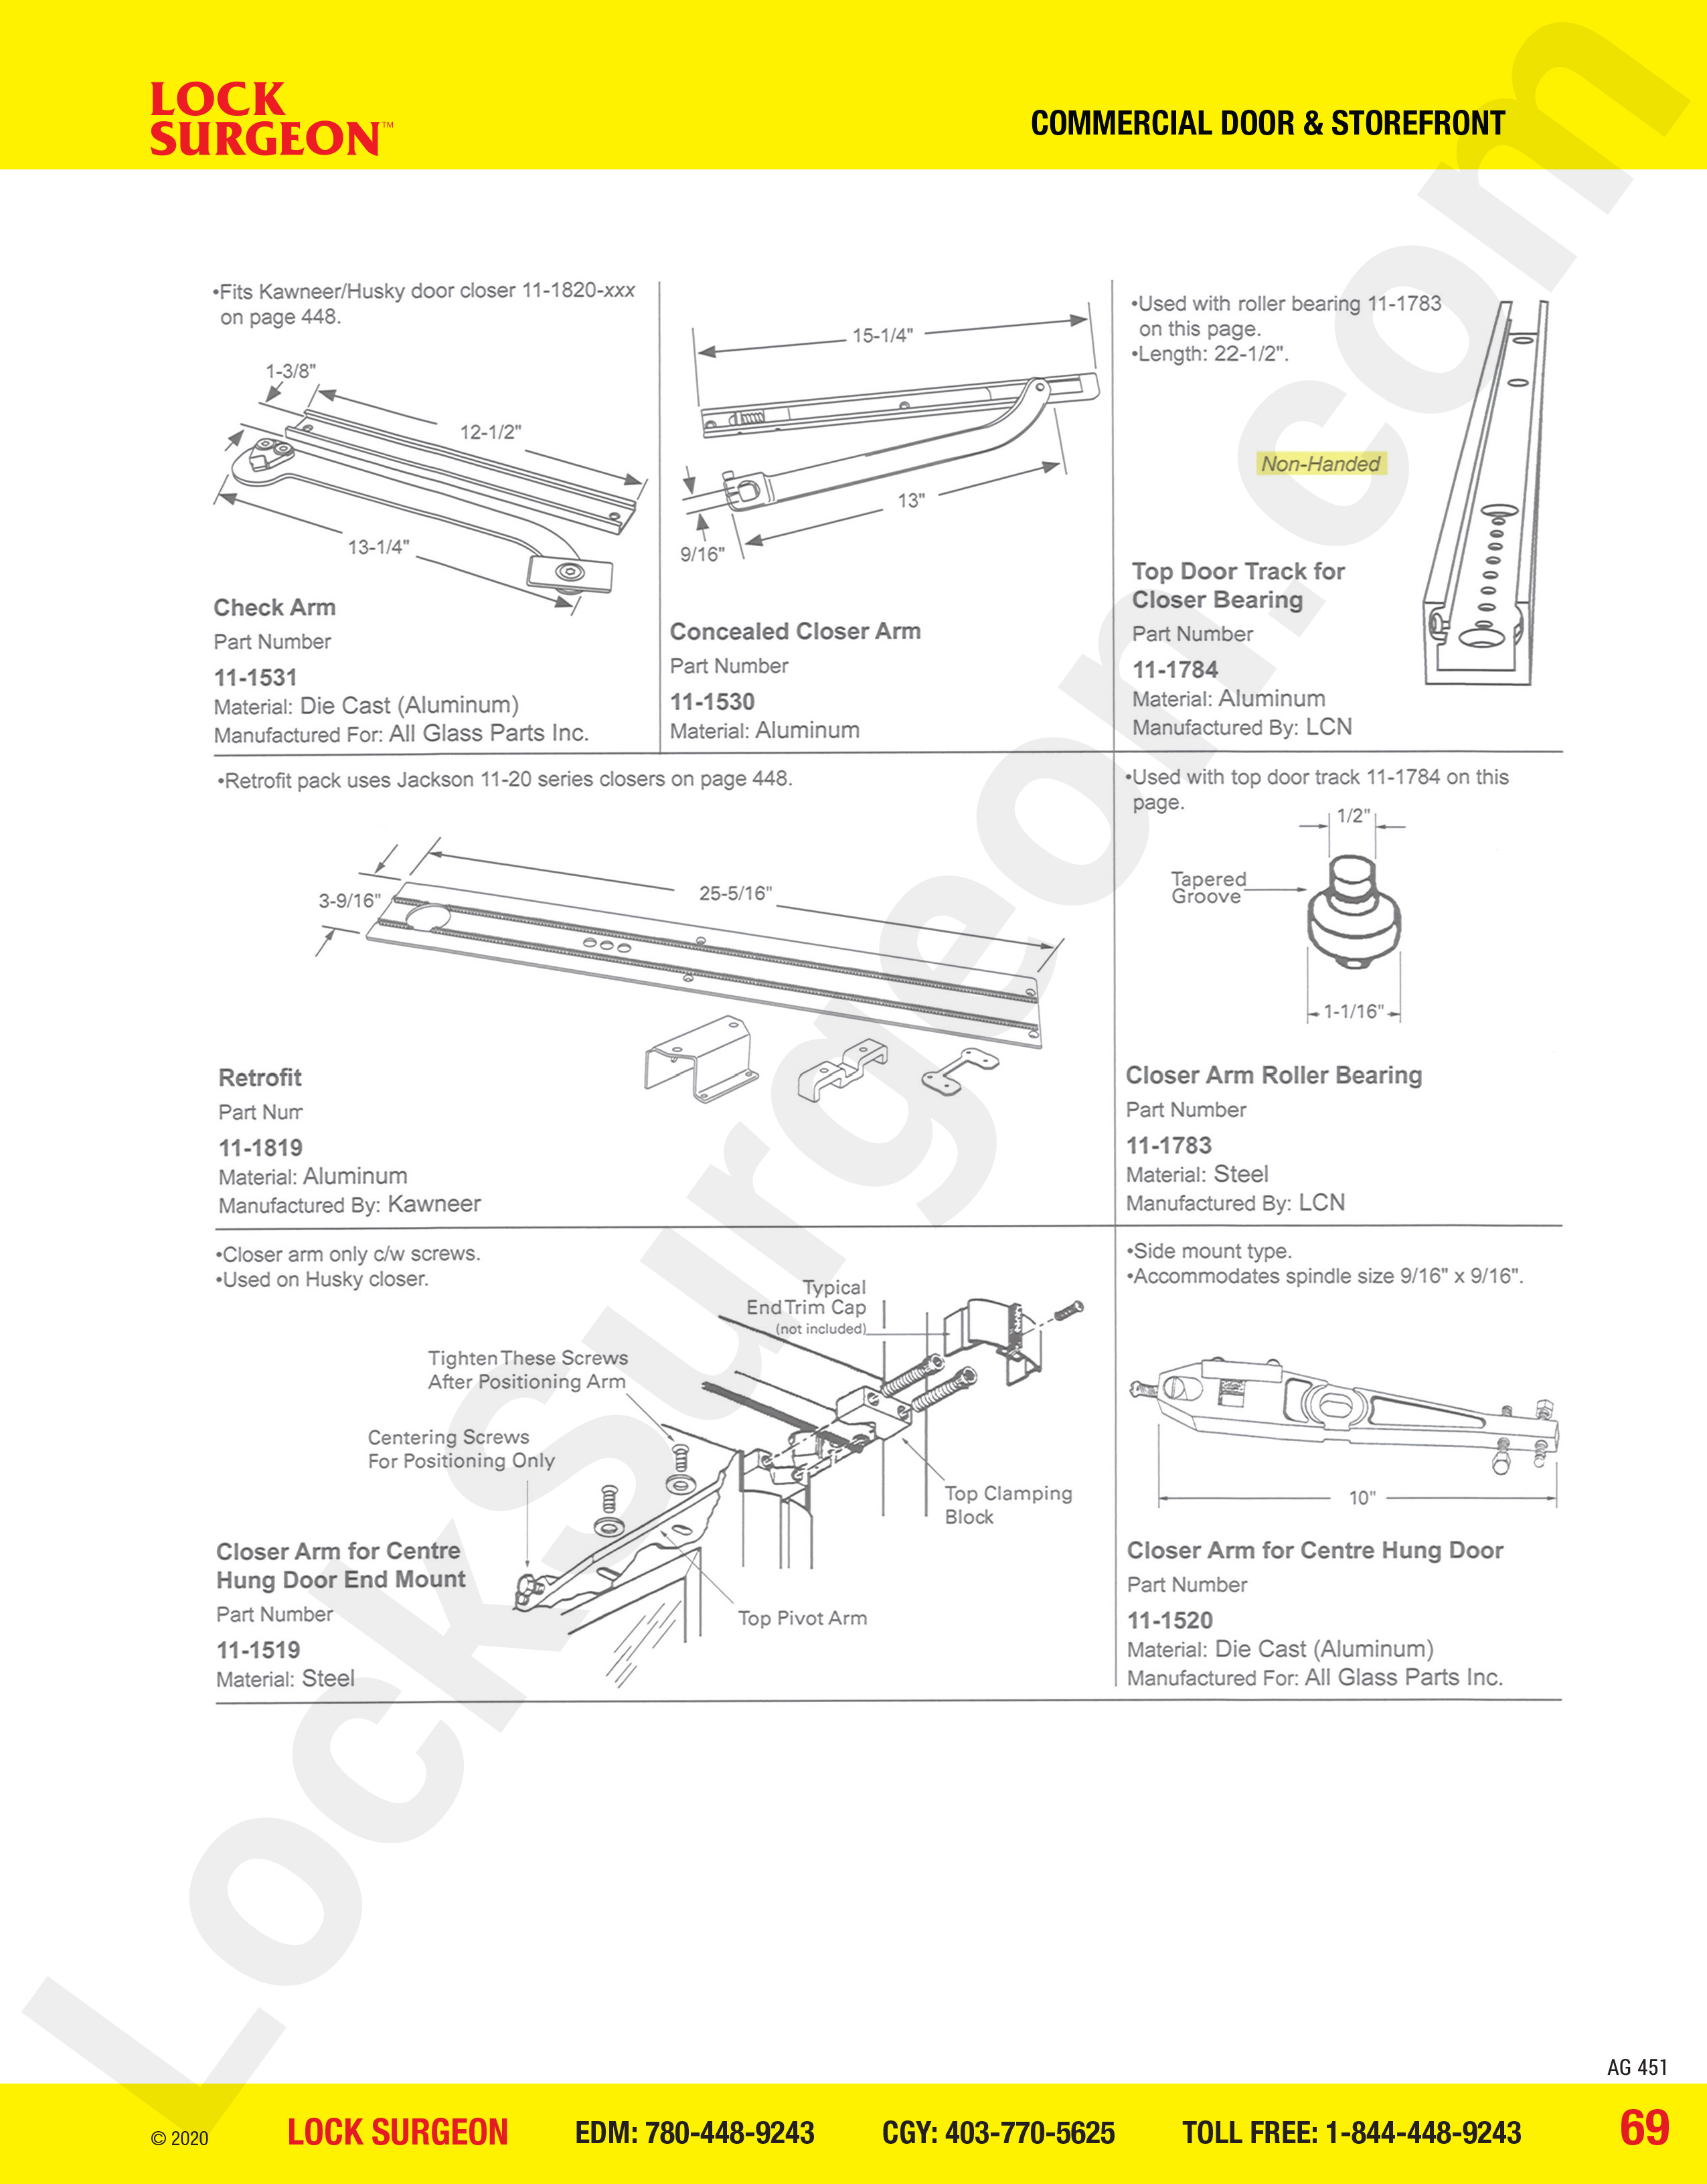 Commercial Door and Storefront parts for commercial closer arms Acheson